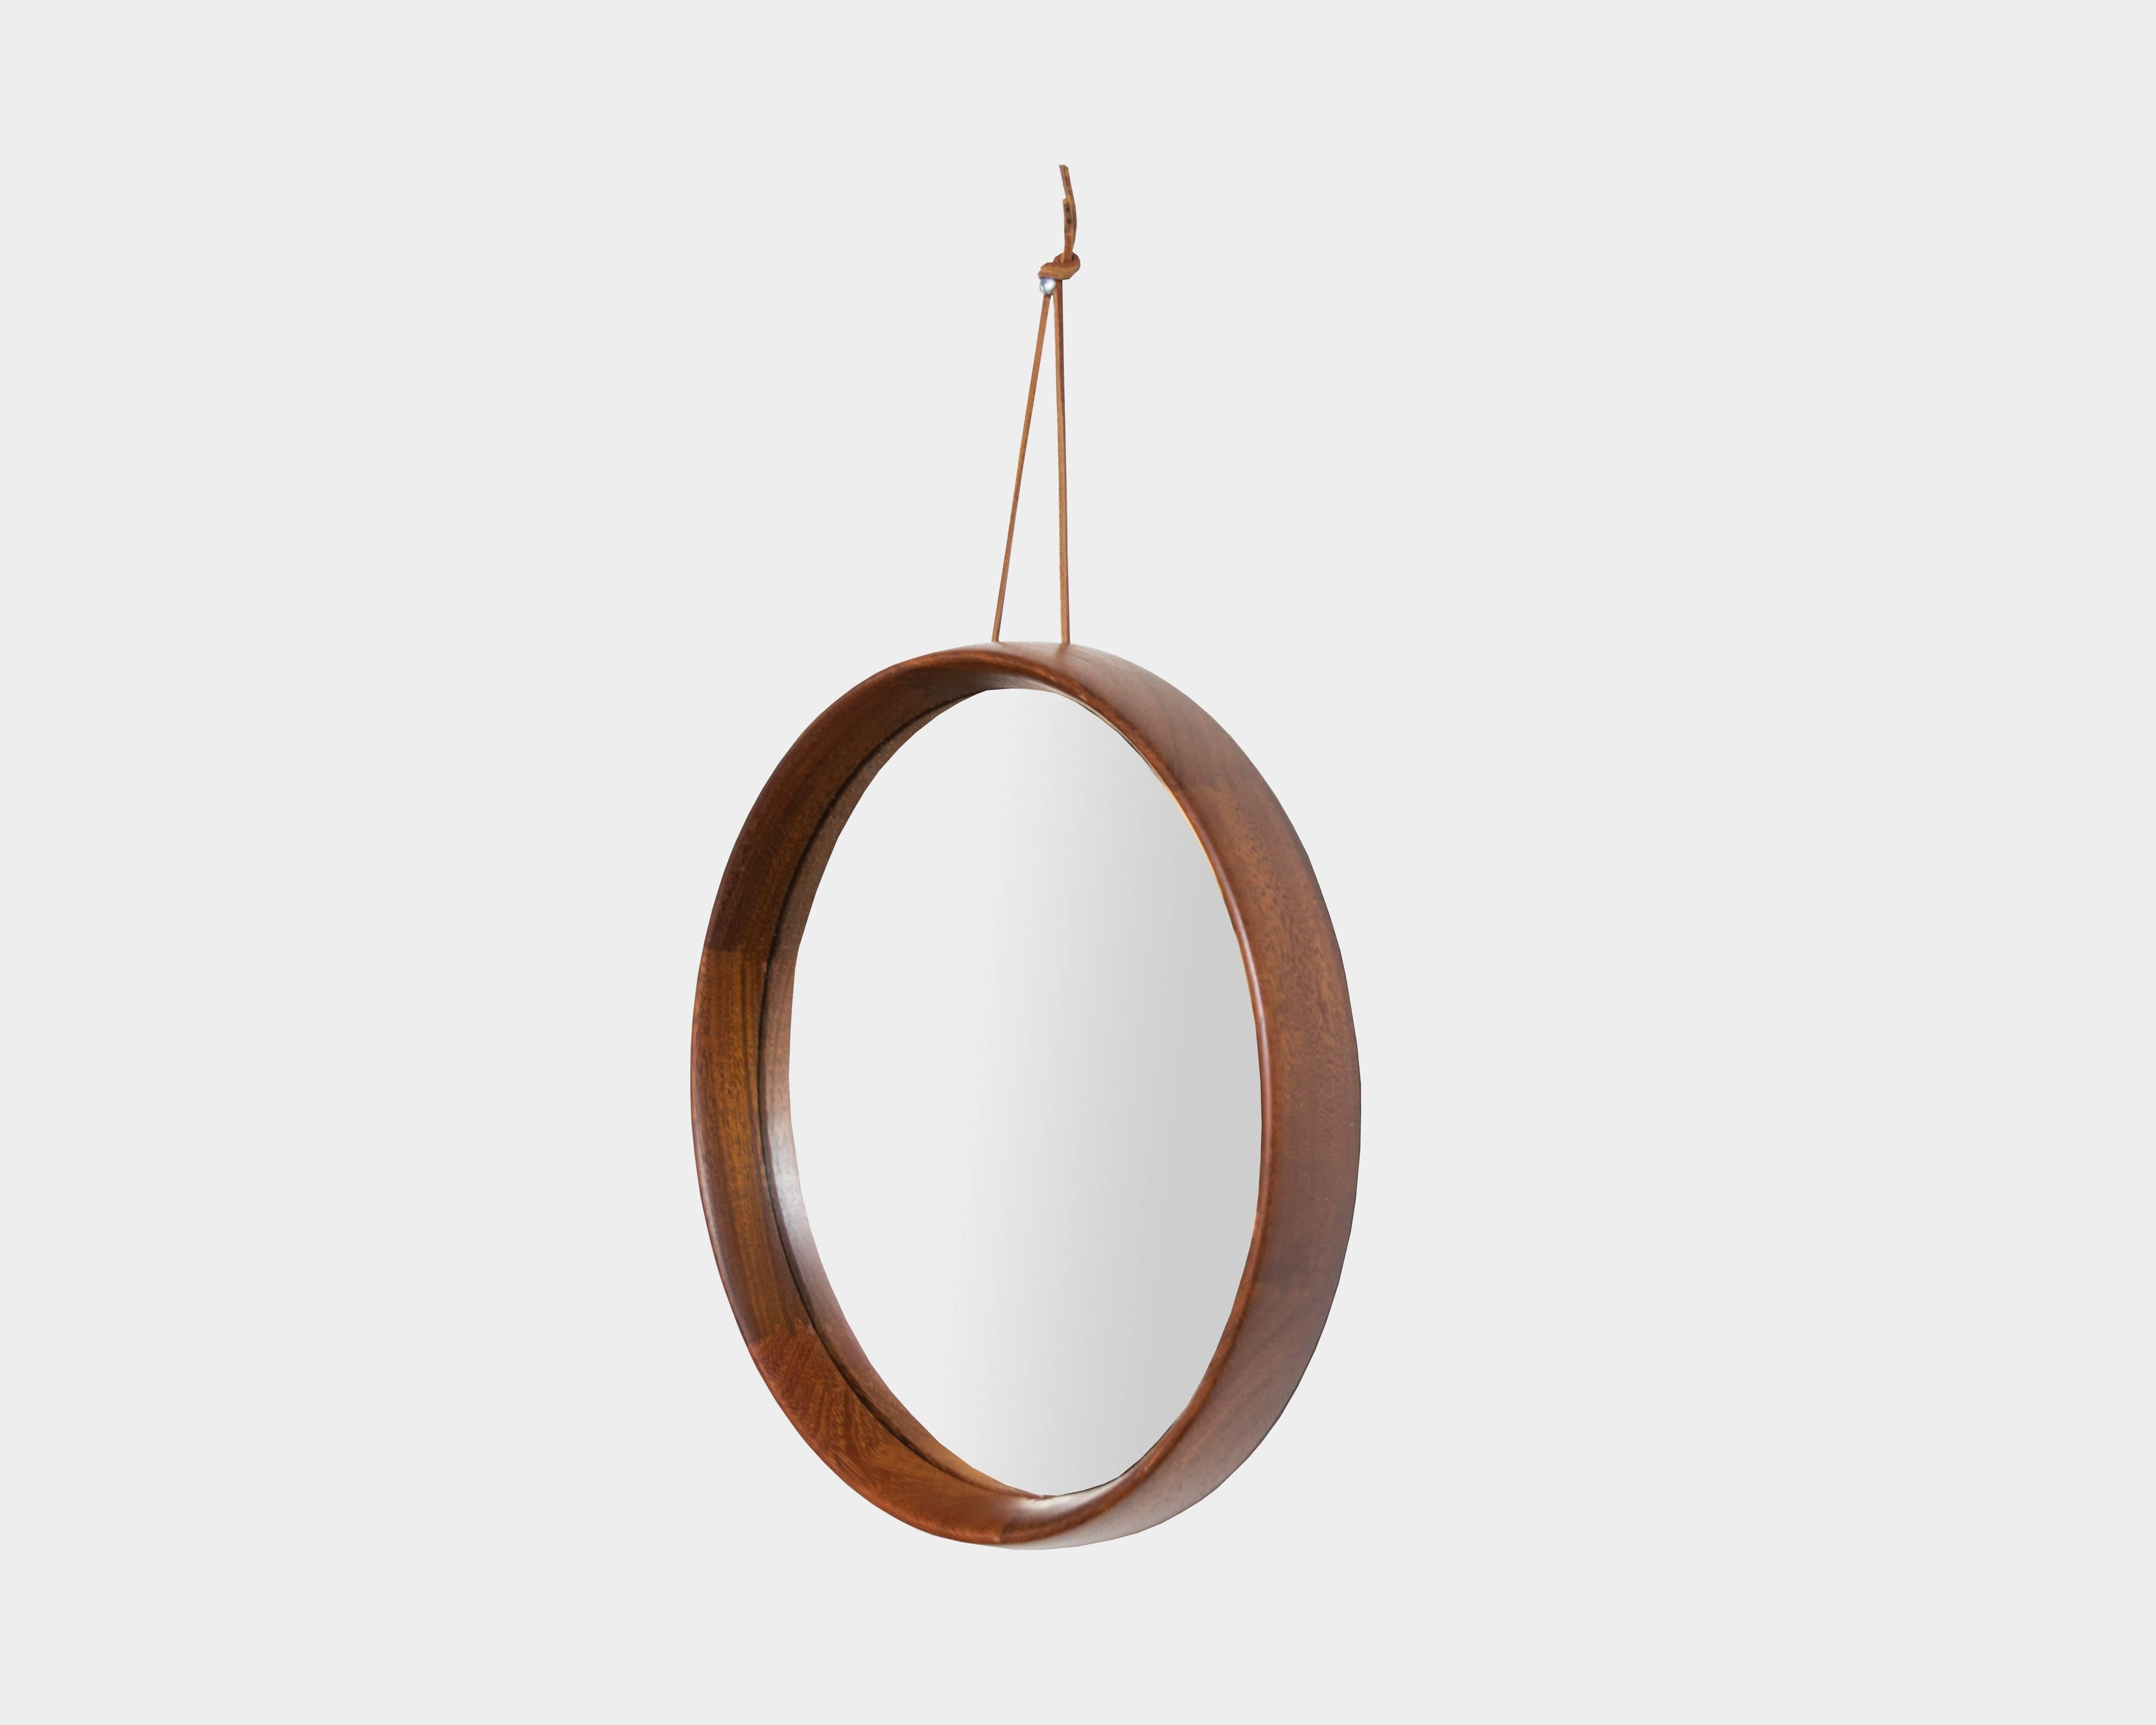 Mid-Century Modern rosewood round mirror with leather hanging strap.